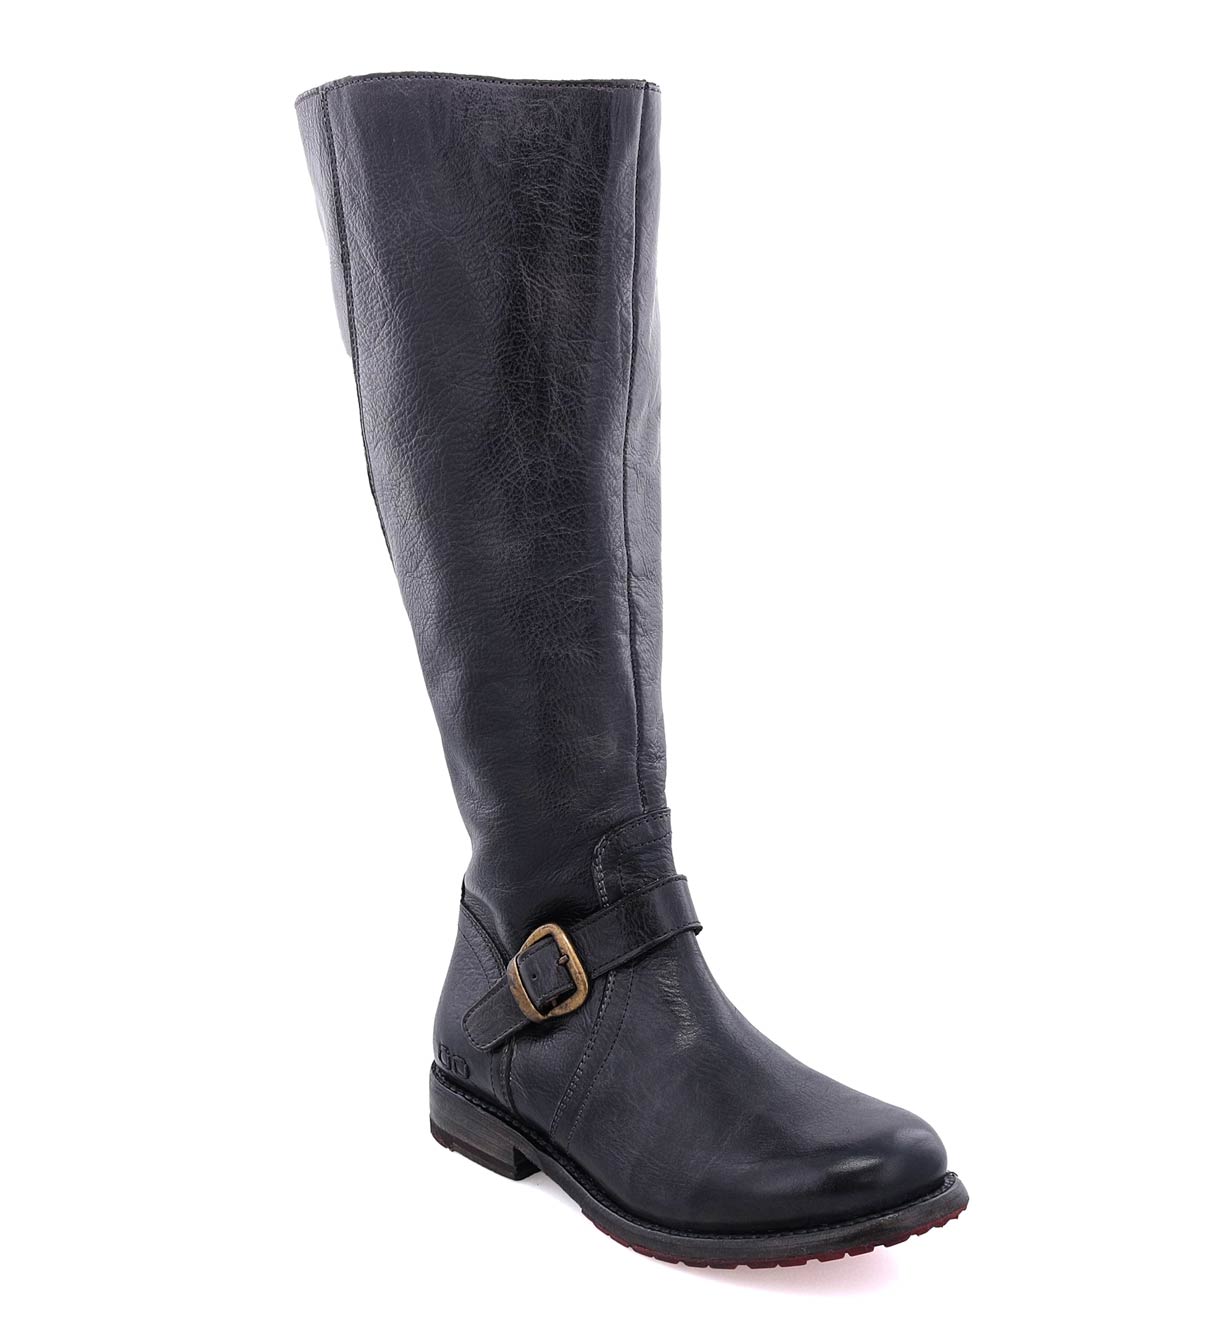 A women's black leather Glaye Wide Calf boot with buckles and buckles by Bed Stu.